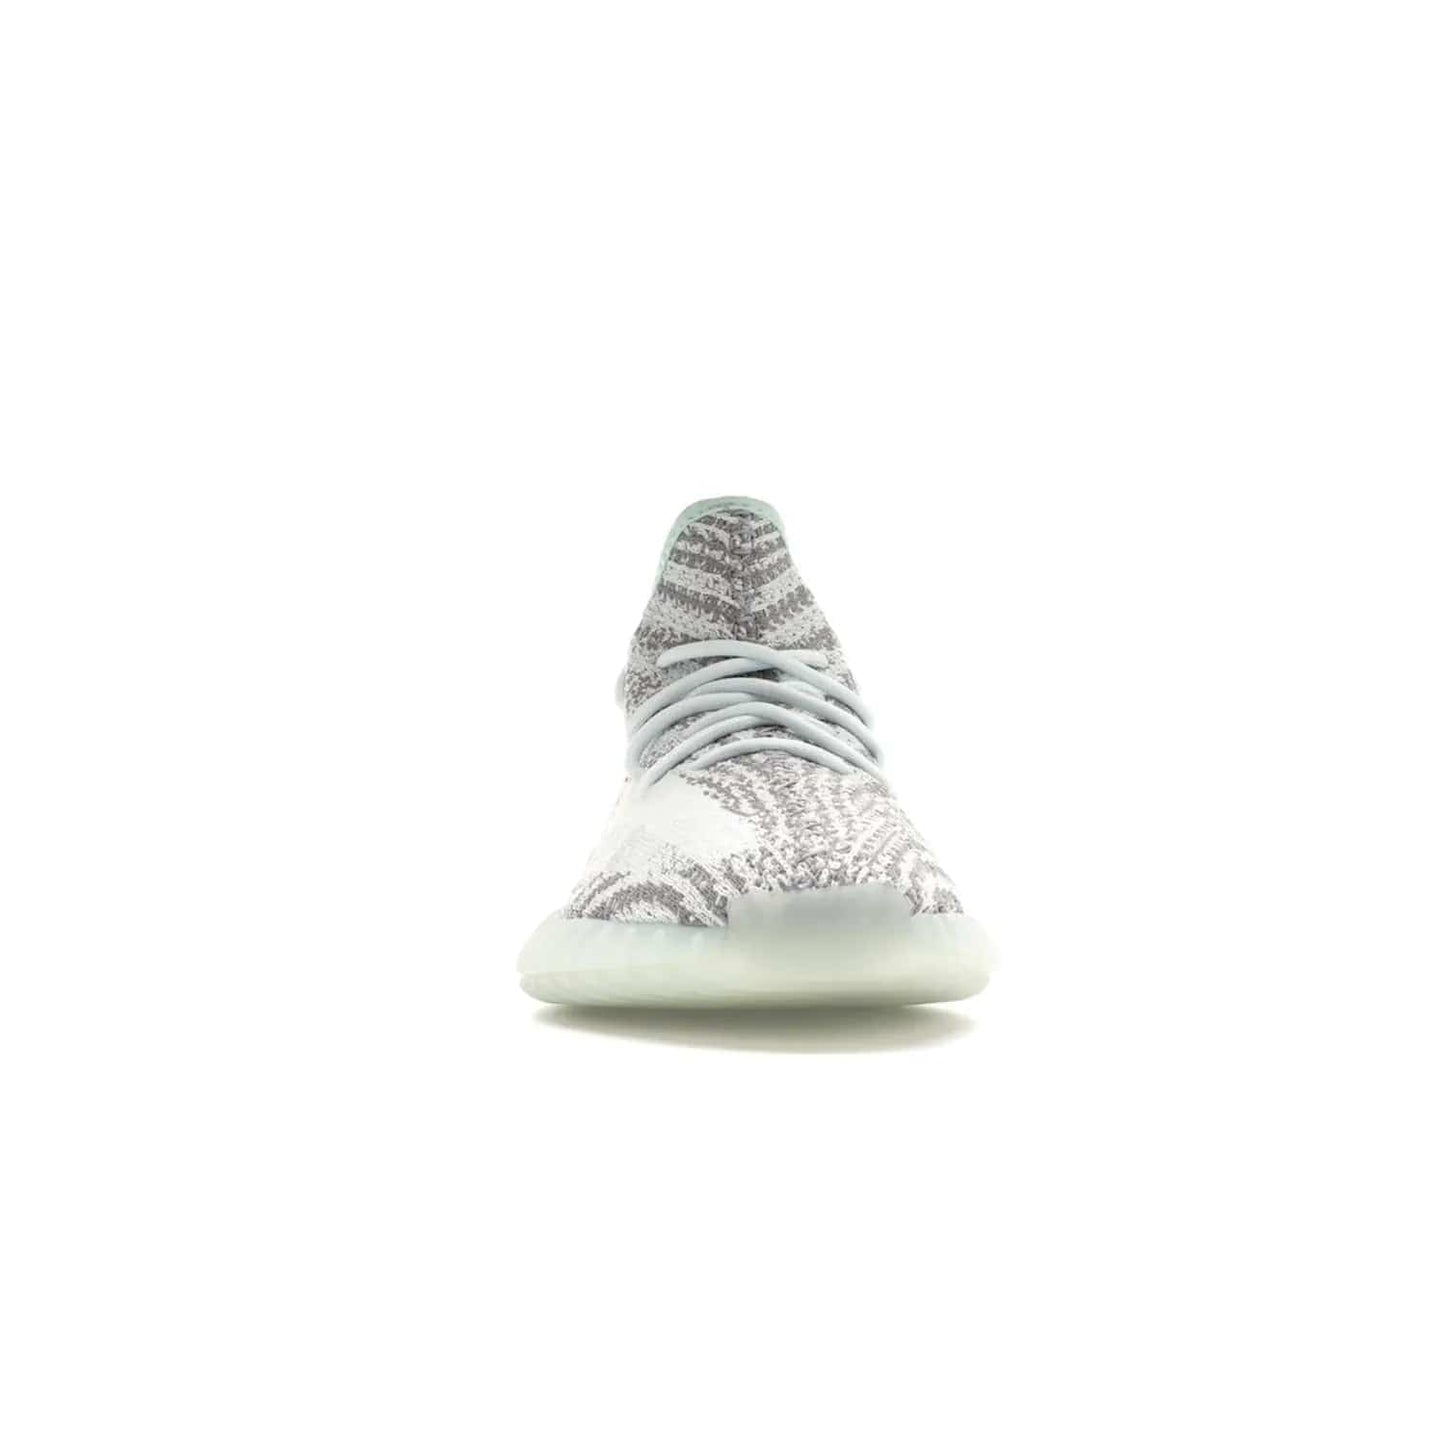 adidas Yeezy Boost 350 V2 Blue Tint - Image 10 - Only at www.BallersClubKickz.com - The adidas Yeezy Boost 350 V2 Blue Tint merges fashion and functionality with its Primeknit upper and Boost sole. Released in December 2017, this luxurious sneaker is perfect for making a stylish statement.